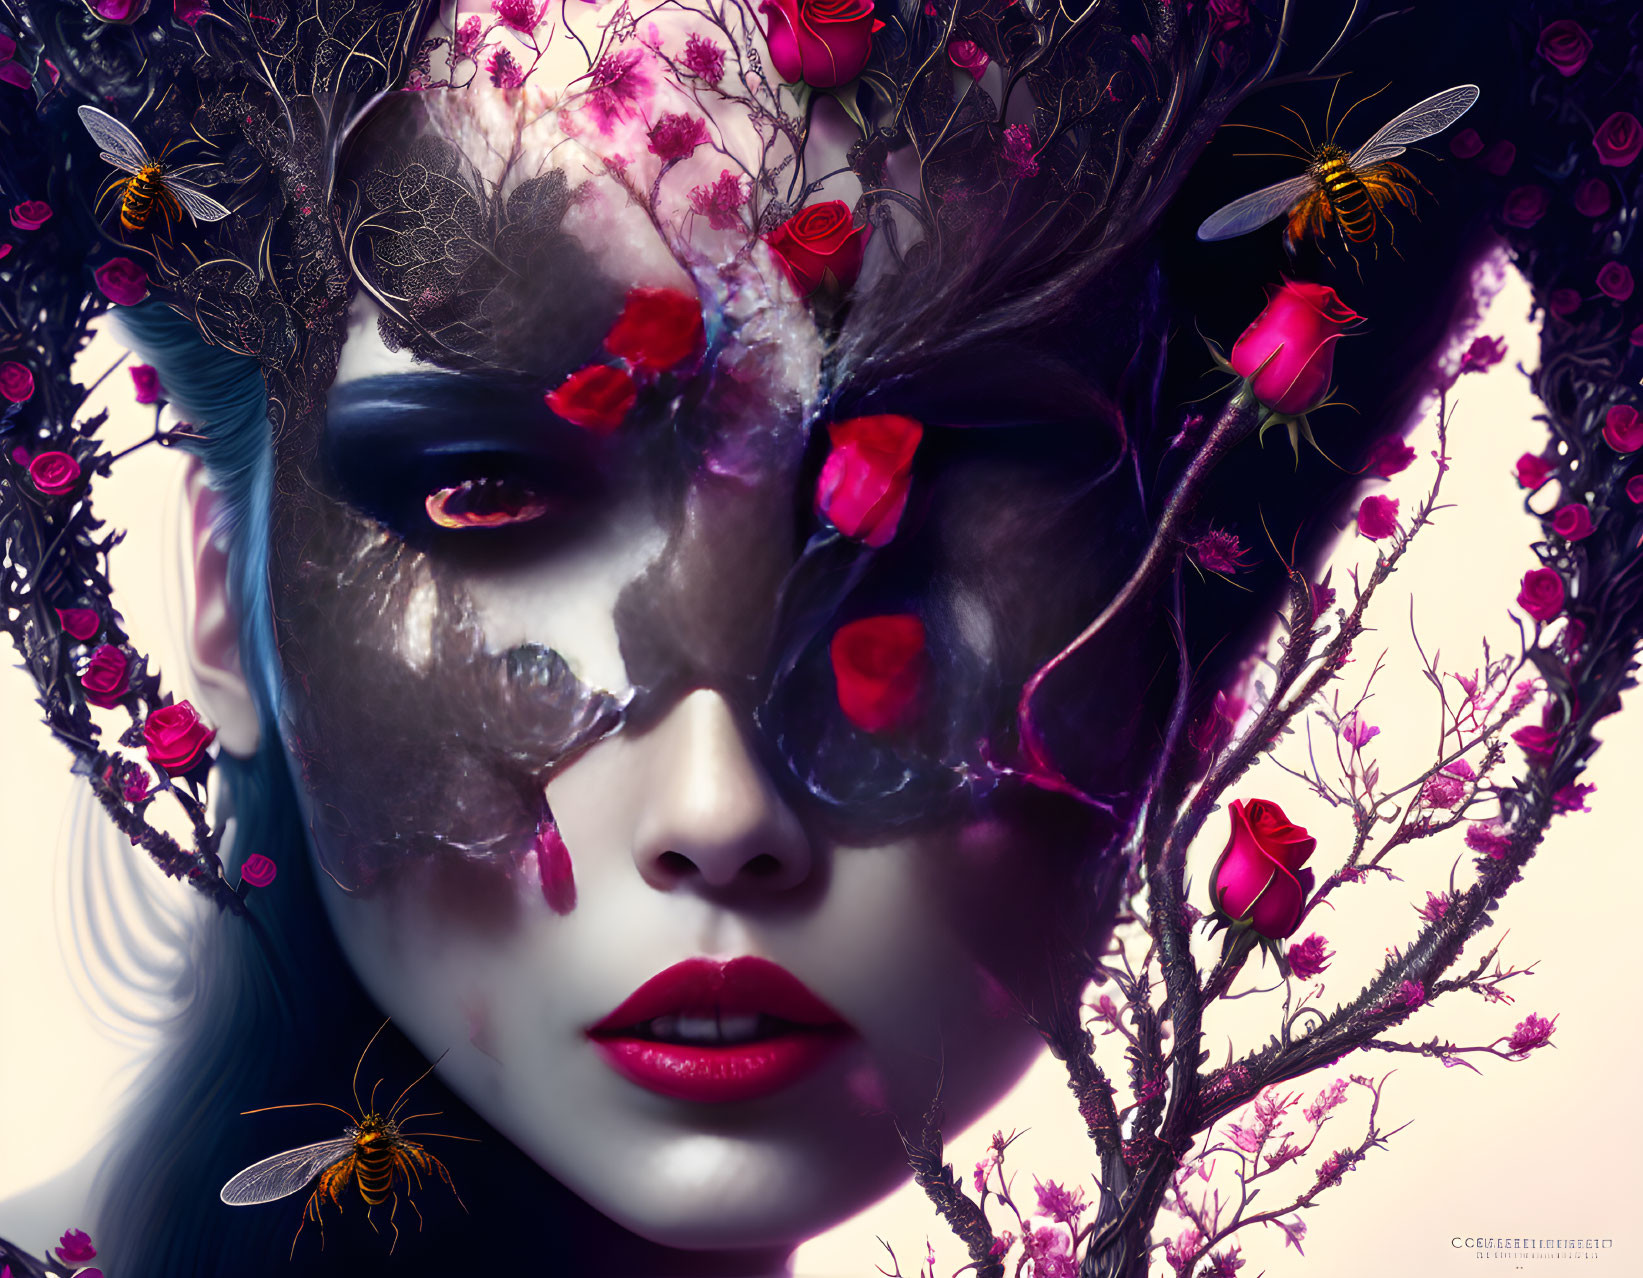 Woman with floral antler mask and bees in surreal portrait.